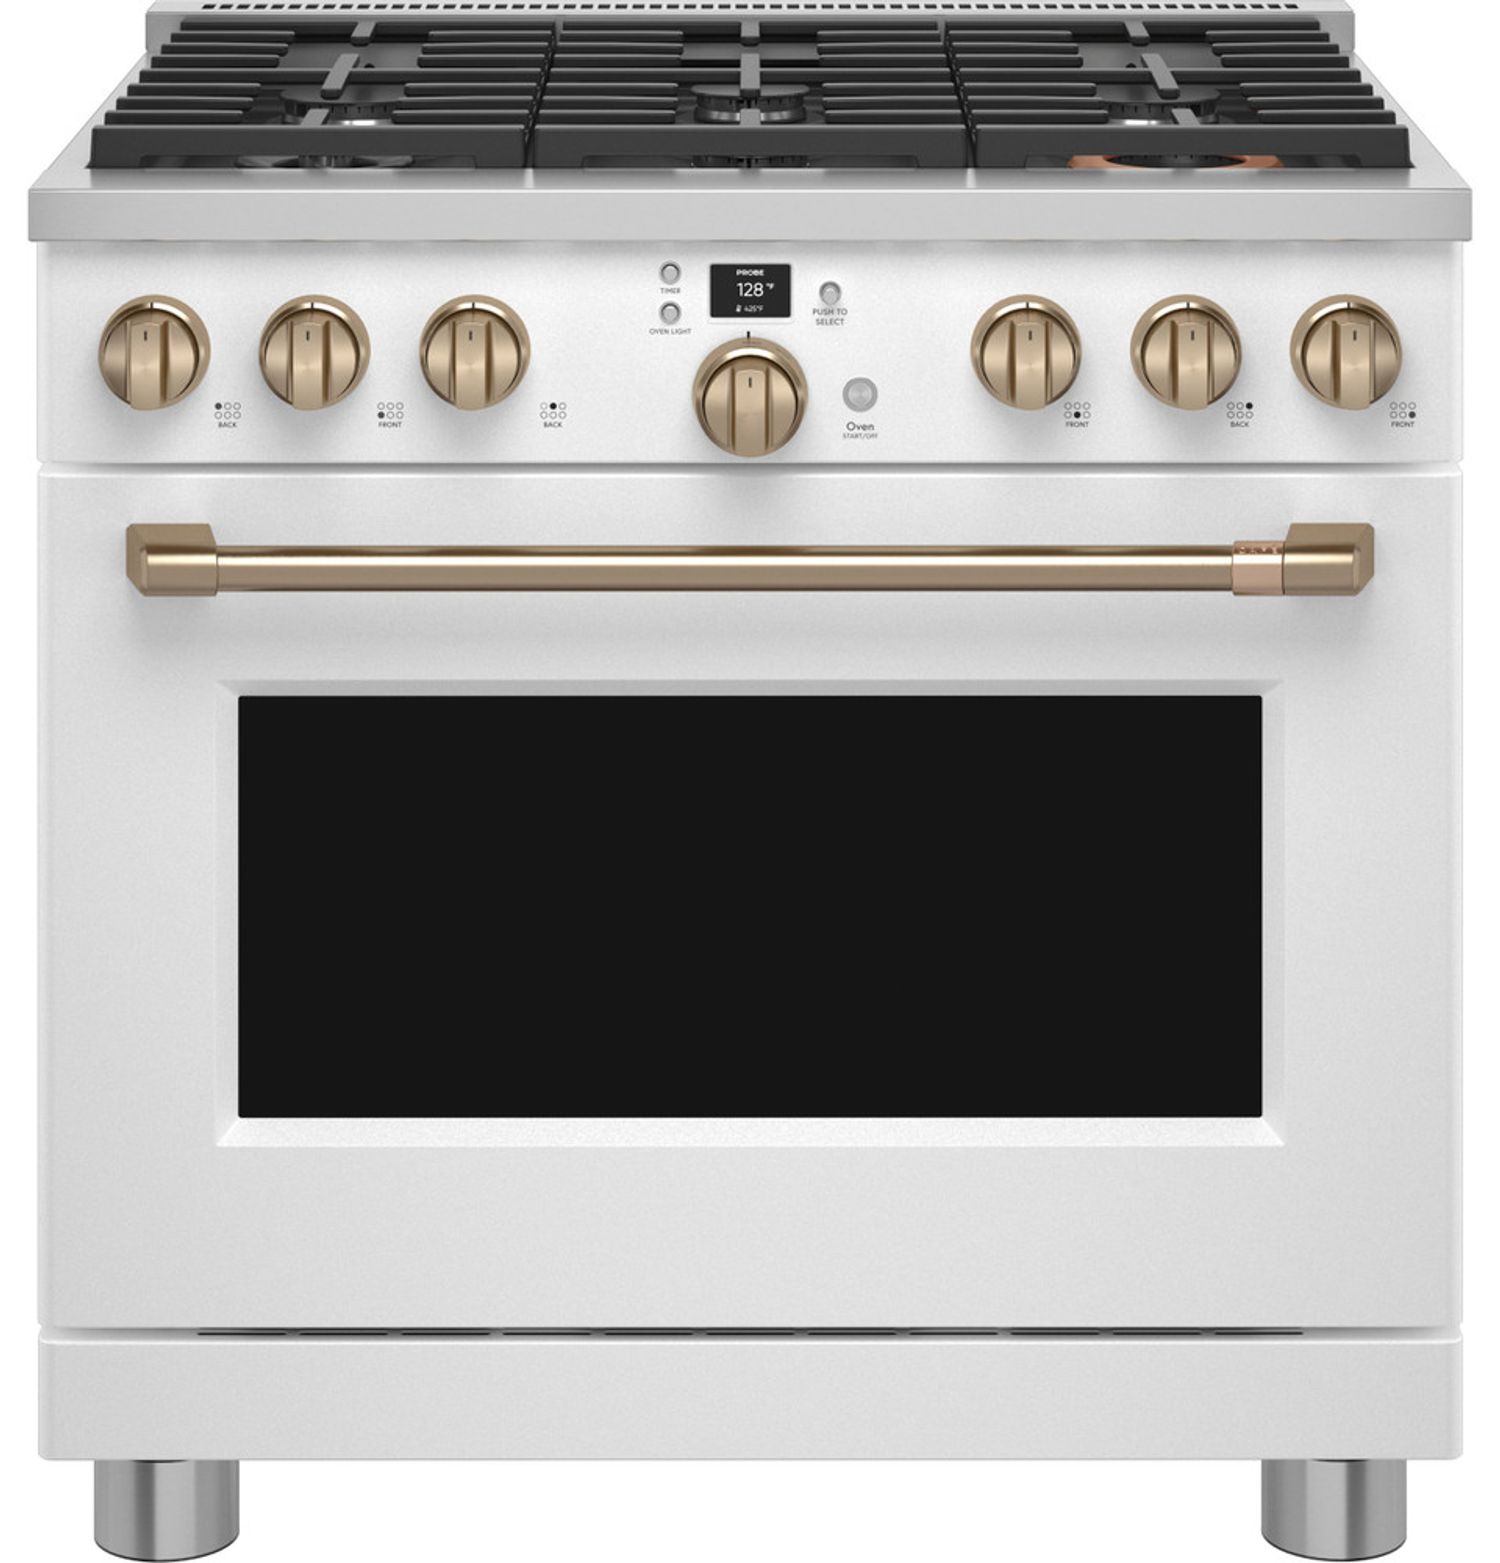 Shop Café Smart Dual-Fuel Commercial-Style 6-Burner Range in Matte White with Brushed Bronze Hardware from Café on Openhaus